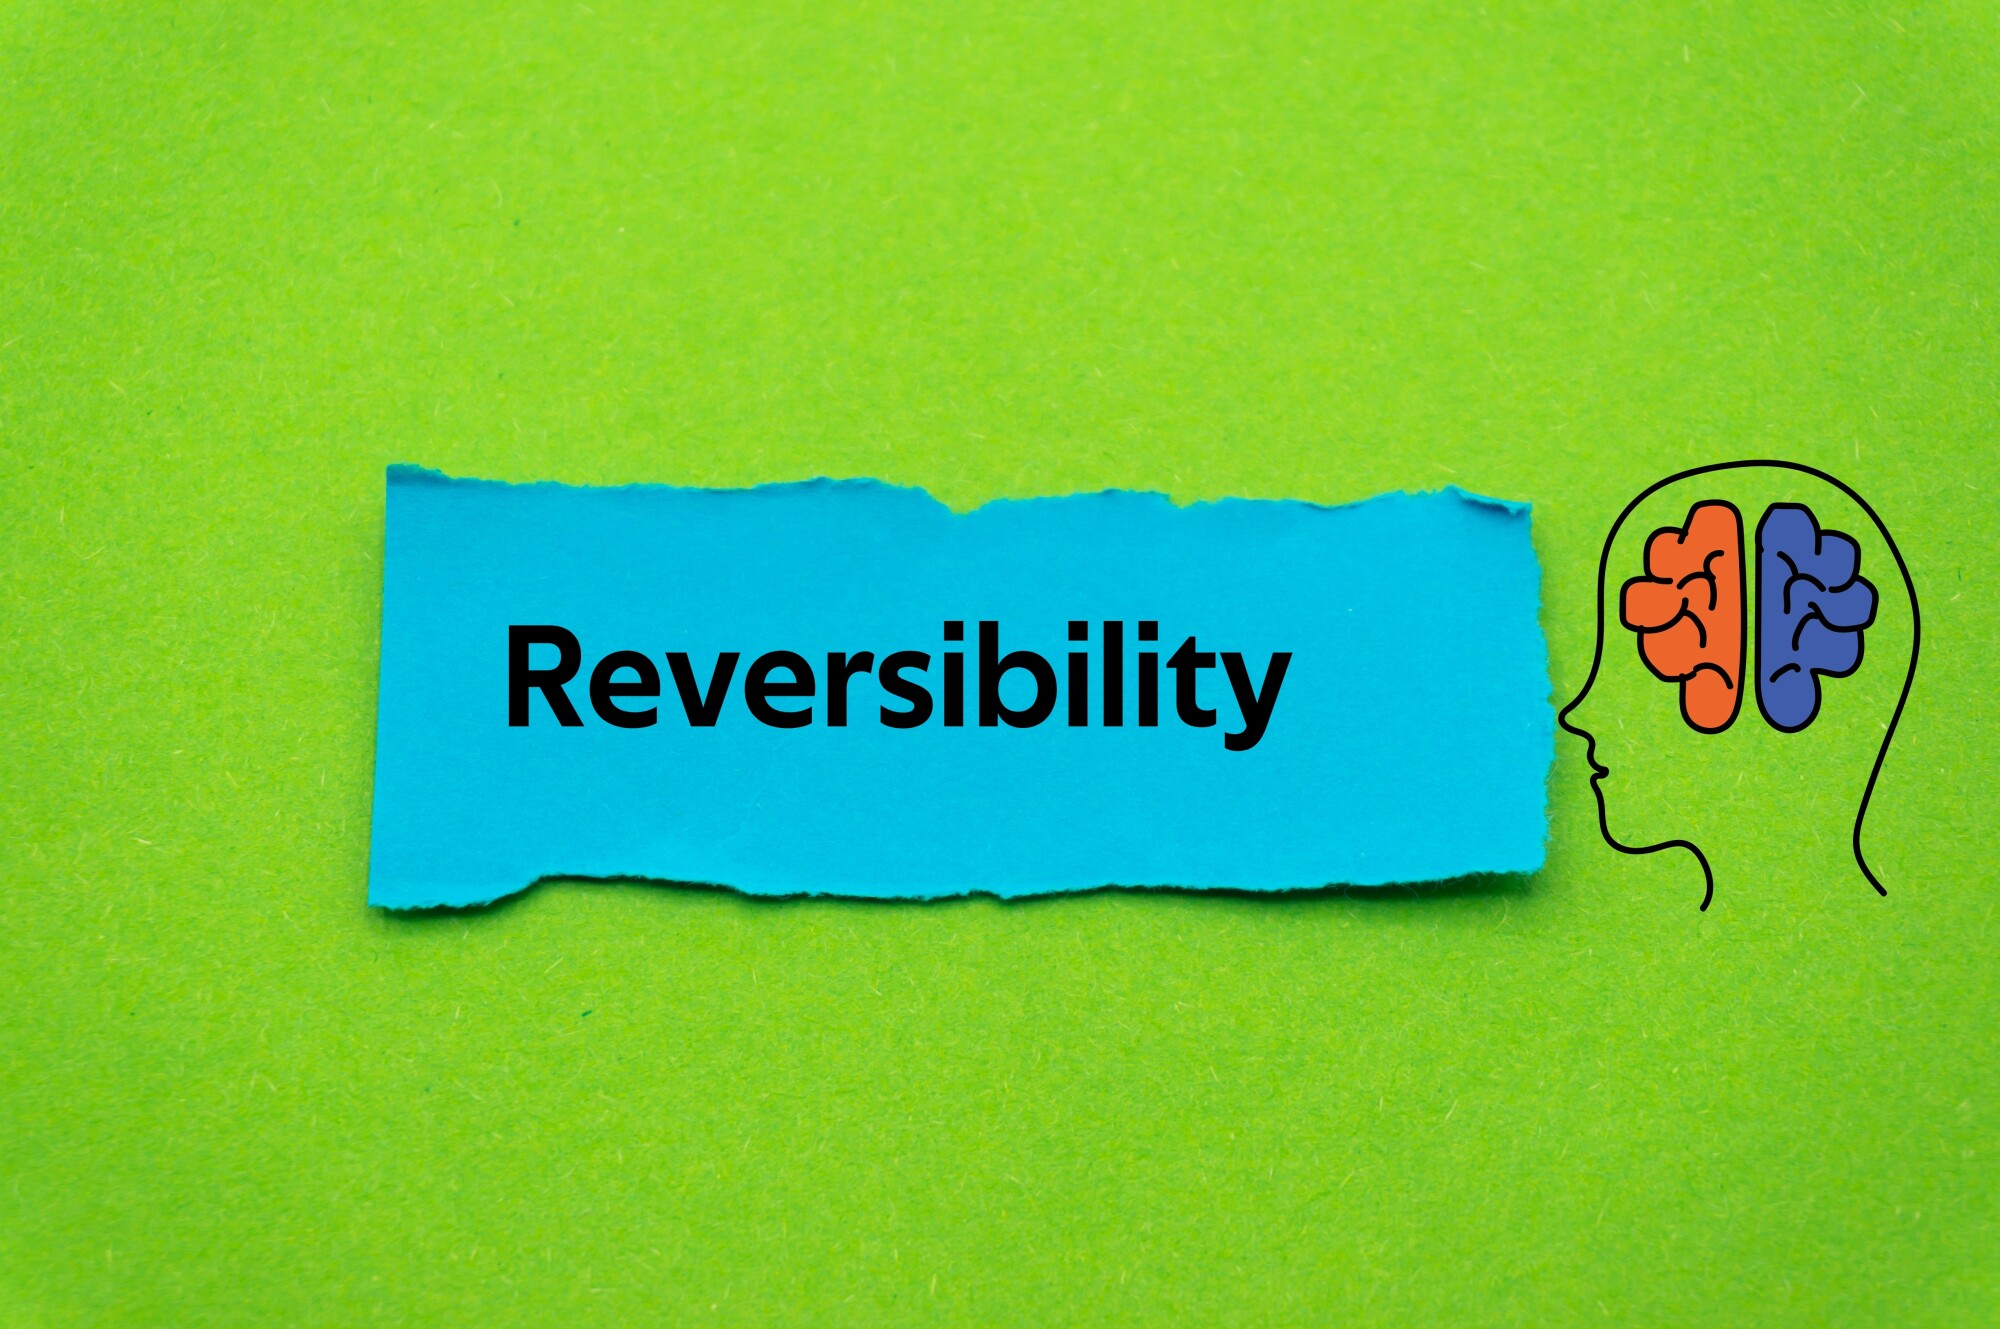 The word “Reversibility” on a torn sheet of blue paper, to the left of a stylized human head having a two-part brain with the left side in red and the right side in blue, all over a green background.